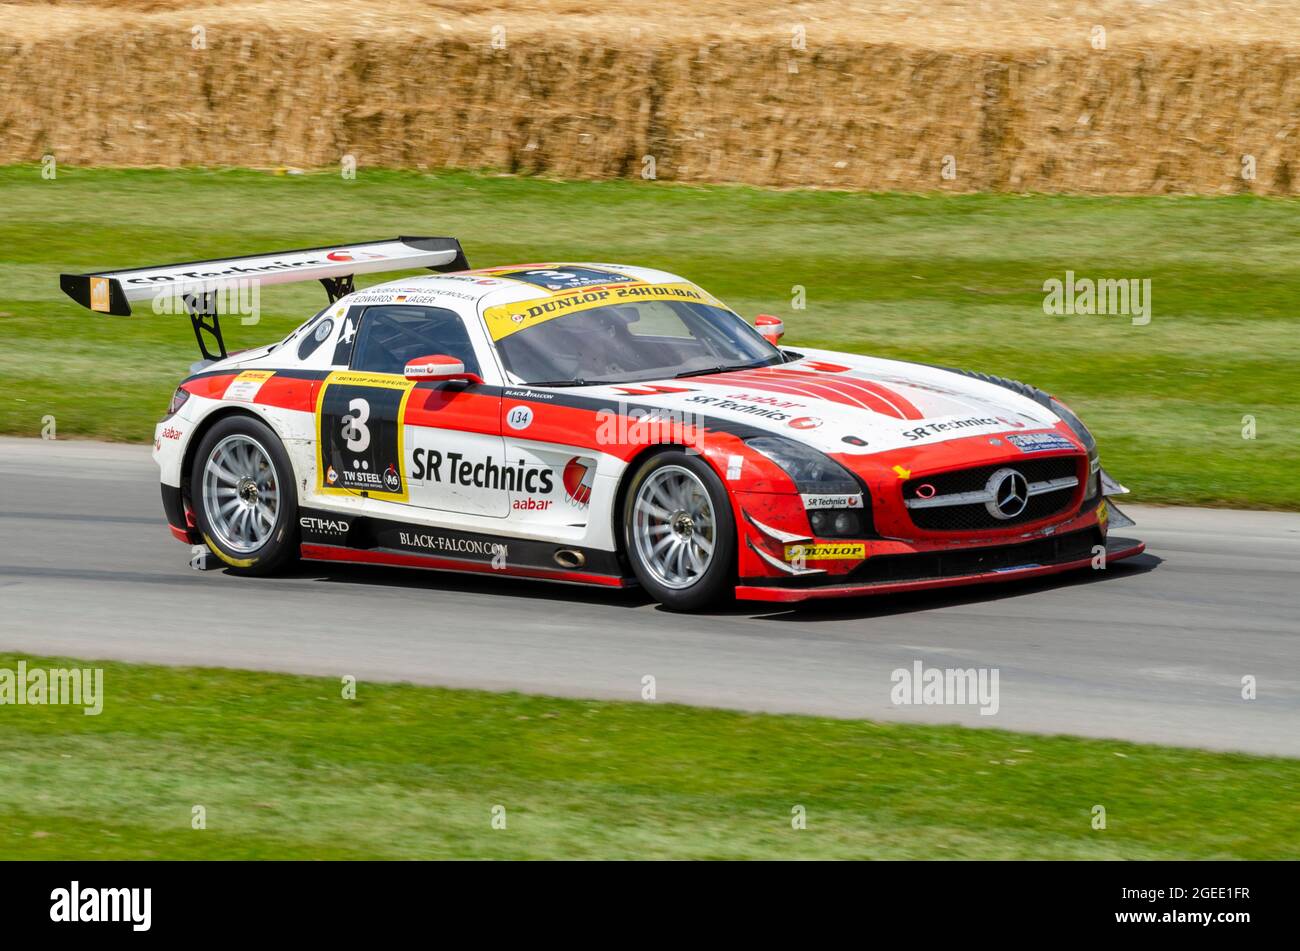 2012 Mercedes-Benz SLS AMG GT3 endurance racer racing car driving up the hill climb track at the Goodwood Festival of Speed motor racing event 2014. Stock Photo